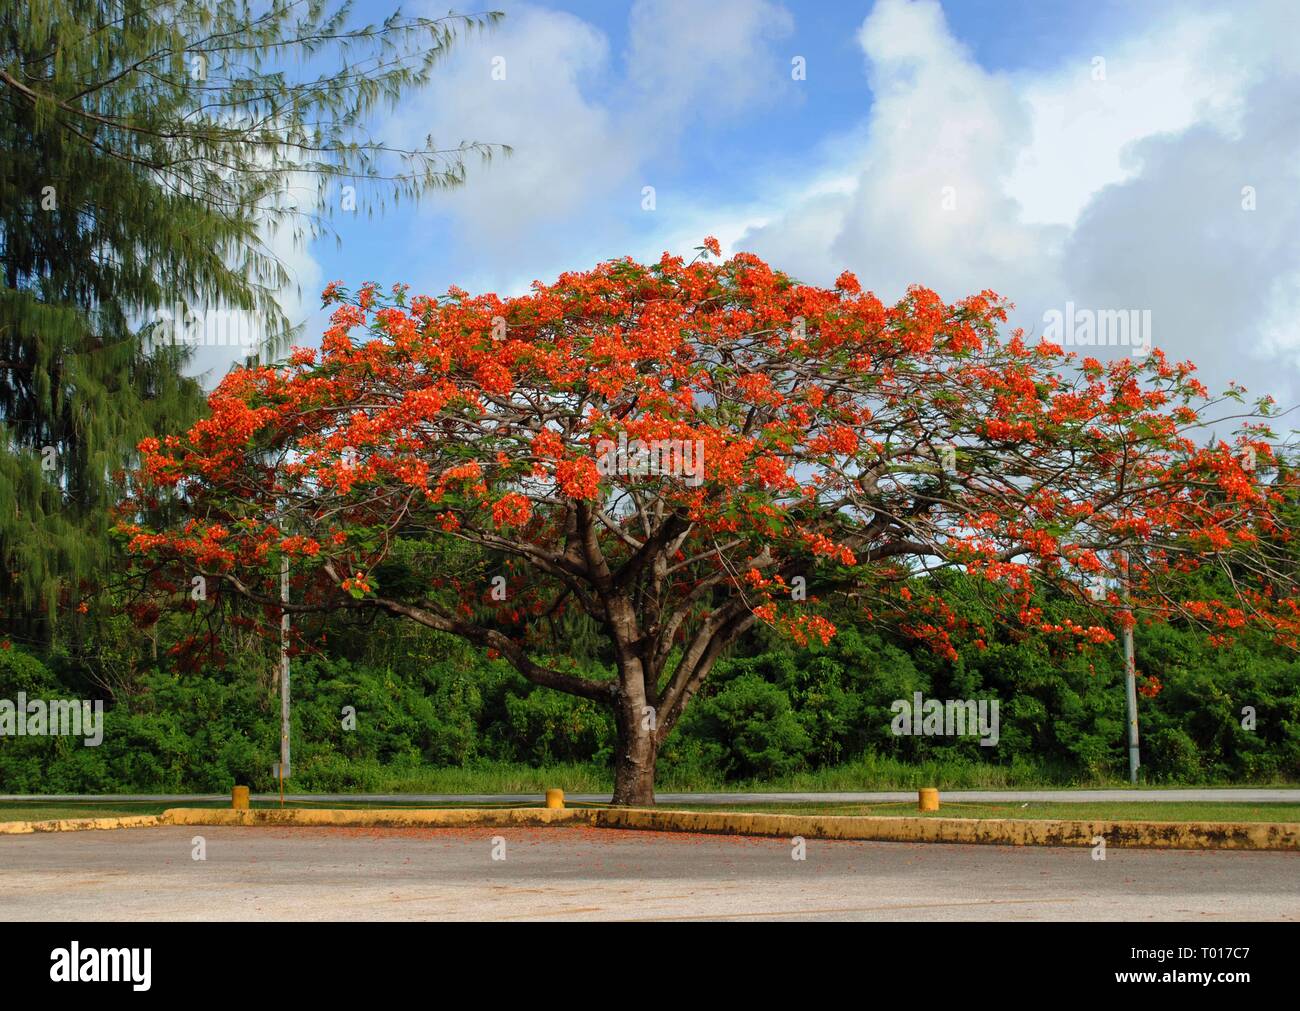 Big flame tree with red and orange blooming flowers at a parking lot Stock Photo